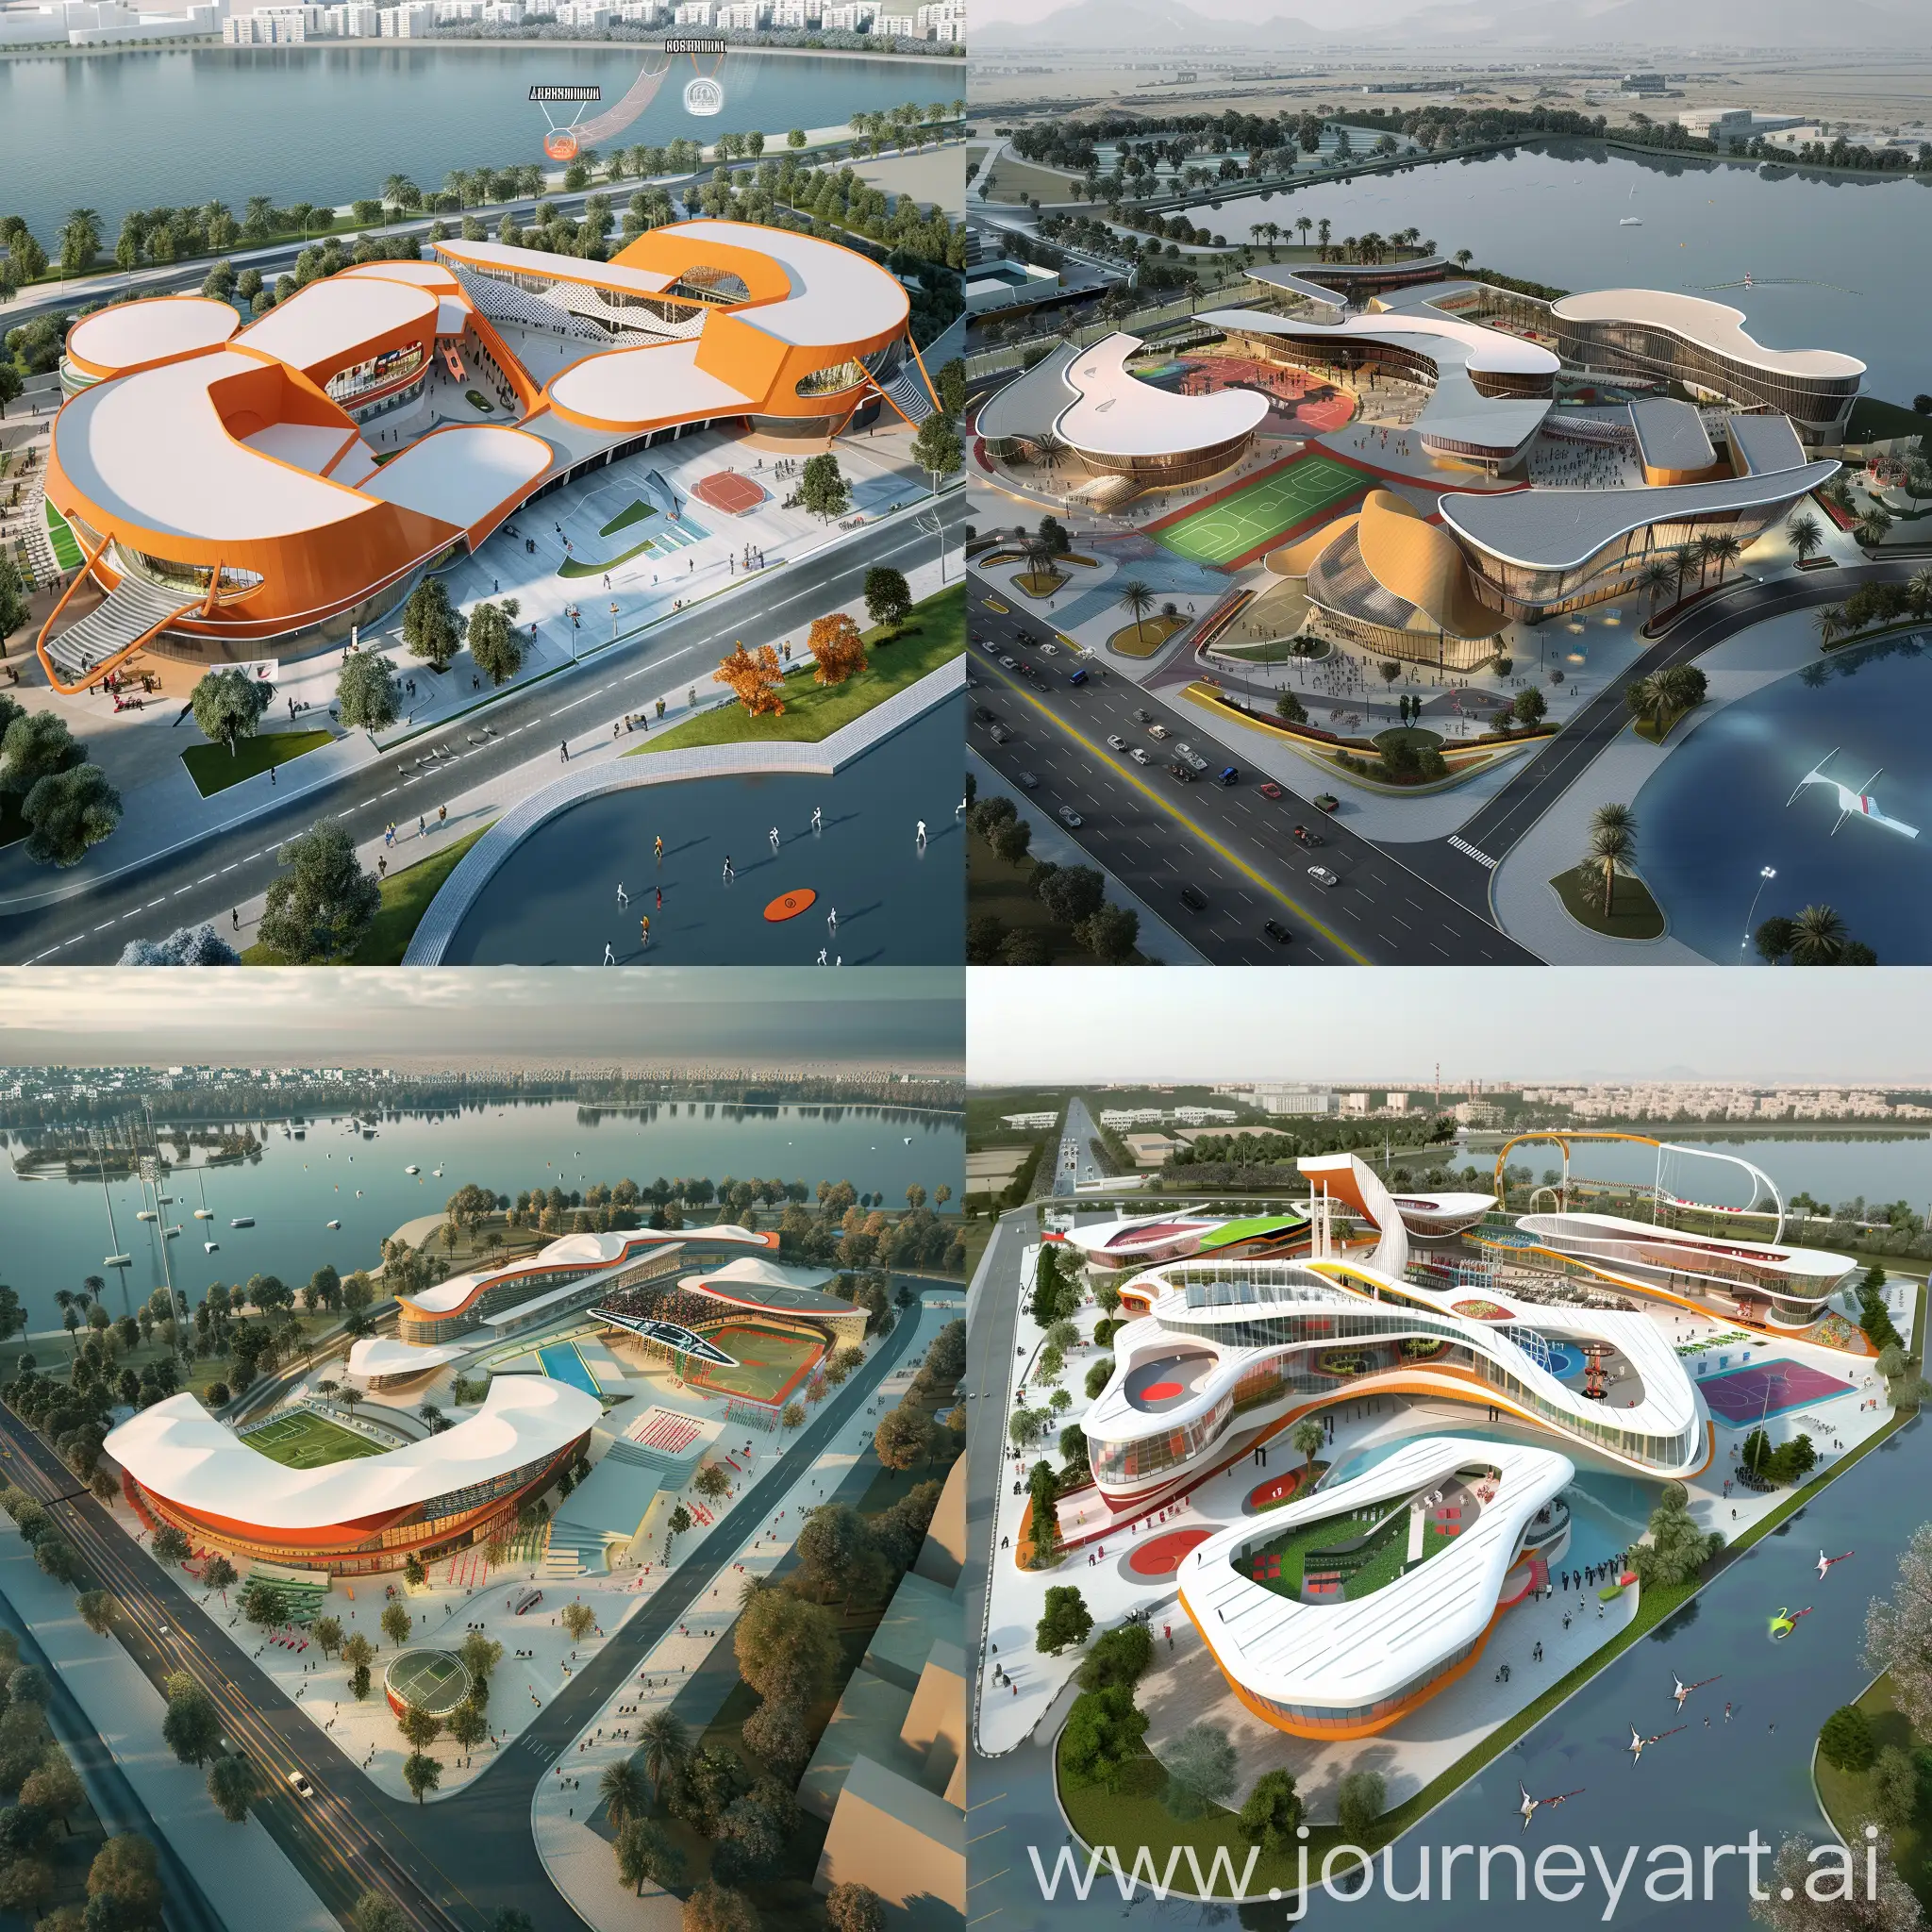 i want you to generate accurate and visually appealing 3D and section images for this architectural graduation project. "Designing a sports center complex in New Alamien City, Egypt, the site boasts a picturesque lake view from the north and is prominently positioned along the main road from the south. The key components of the project include a main hall for basketball, handball, and other sports, a smaller hall for diverse activities, a vibrant food court, an outdoor court for archery with spectator seating, a compact administrative zone, a unique Soccer Beach, a hanged Olympic swimming pool designed to be extraordinary, a small rehabilitation area, and retail stores offering sports-related souvenirs and equipment. The design inspiration is derived from the organic compounds of hormones released during physical exertion, namely Adrenaline, Noradrenaline, Cortisol, and Testosterone. The resulting architectural form embodies the dynamic movement of athletes, featuring abstracted curves. Adrenaline influences varying height levels, Cortisol results in smoother building surfaces, and Testosterone manifests as competitive buildings trying to surpass one another. The overall style aspires to be smart and iconic, capturing the essence of the project's unique inspiration."